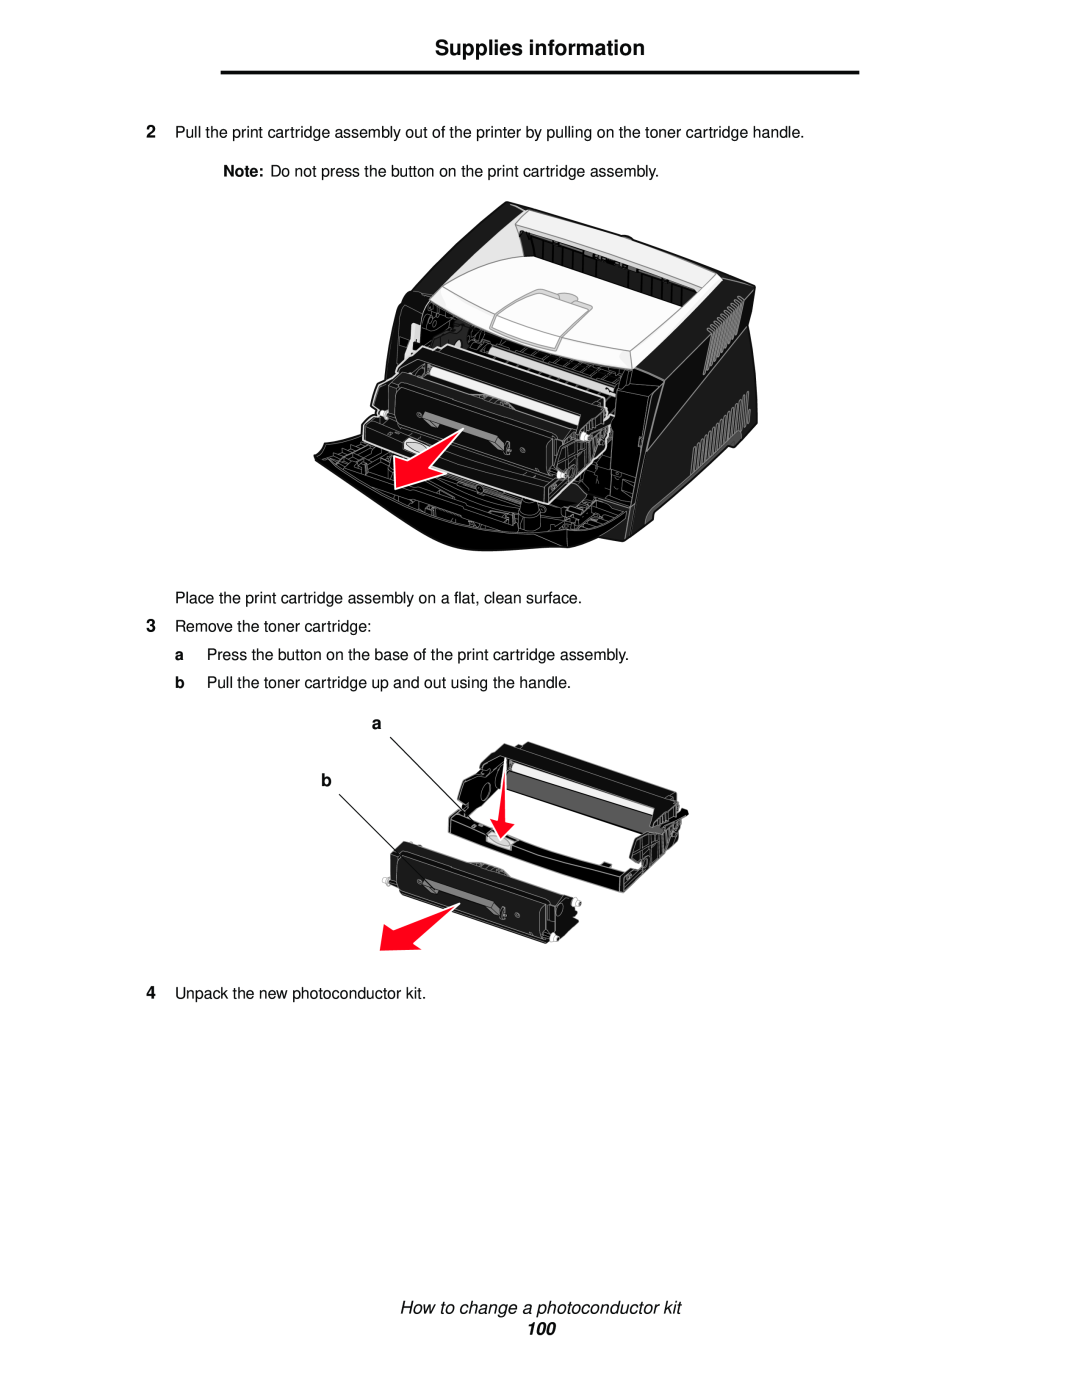 Lexmark 342n, 340 manual Supplies information, How to change a photoconductor kit 